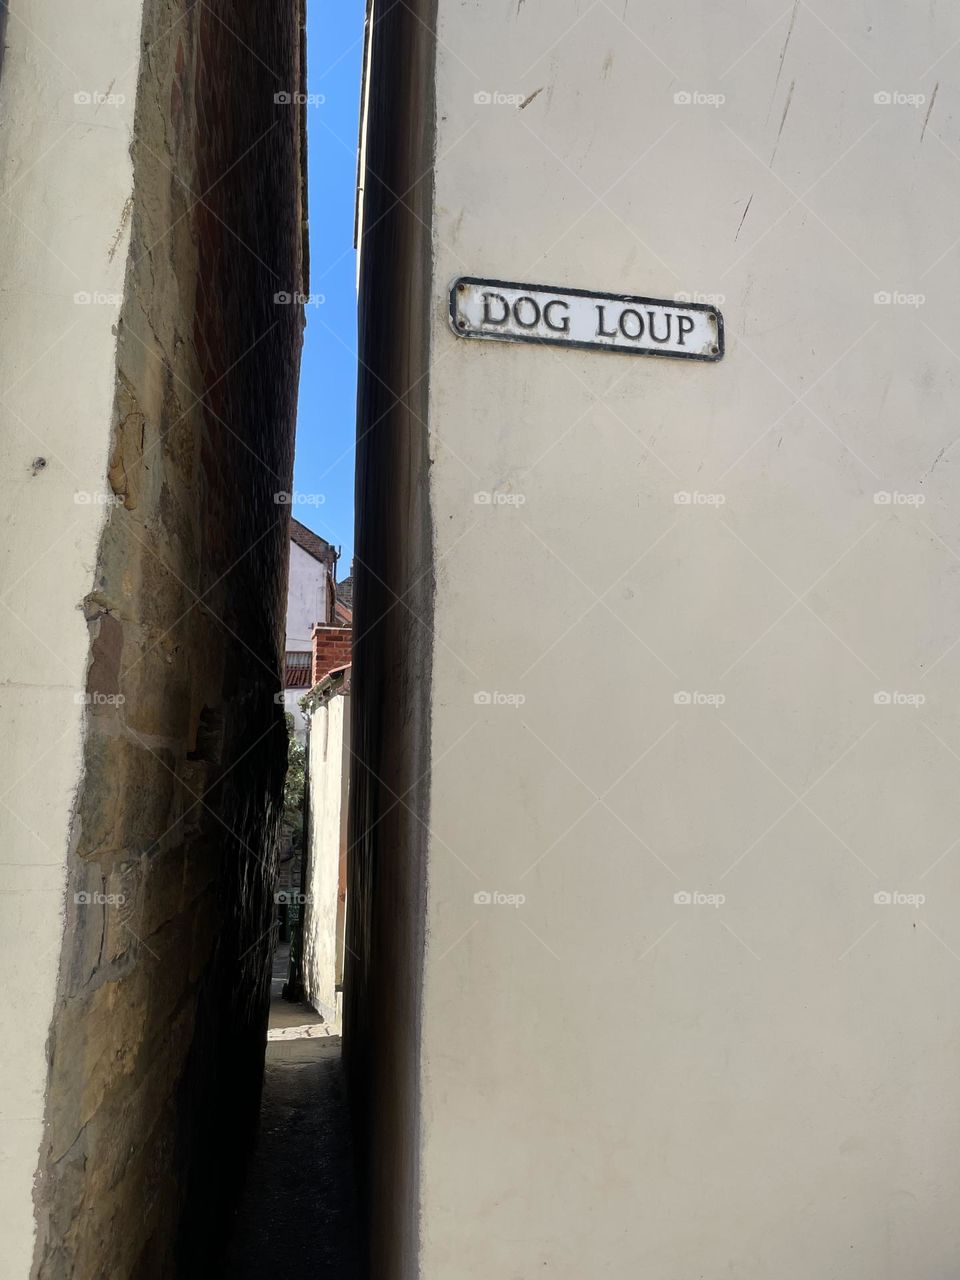 Glimpse of the scorching hot blue sky day from a very narrow alley called Dog Loup !